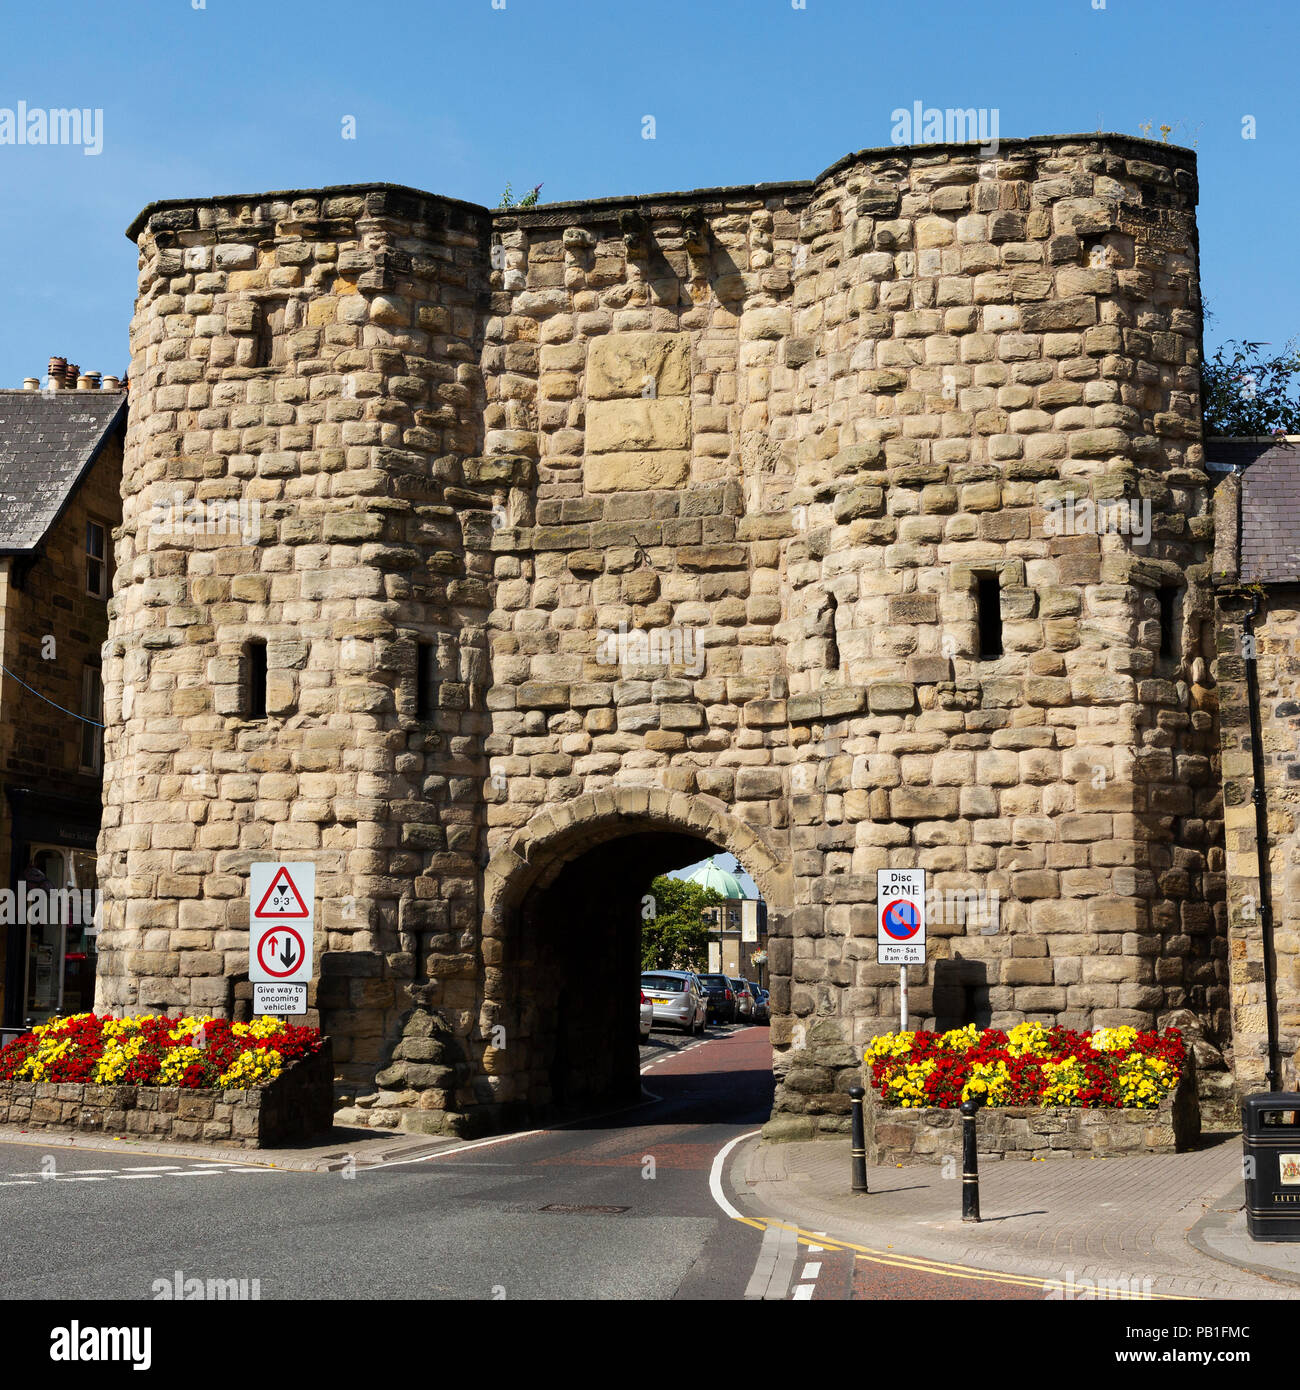 The Bondgate Tower at Alnwick  in Northumberland, England. It is also known as the Hotspur Tower. Stock Photo